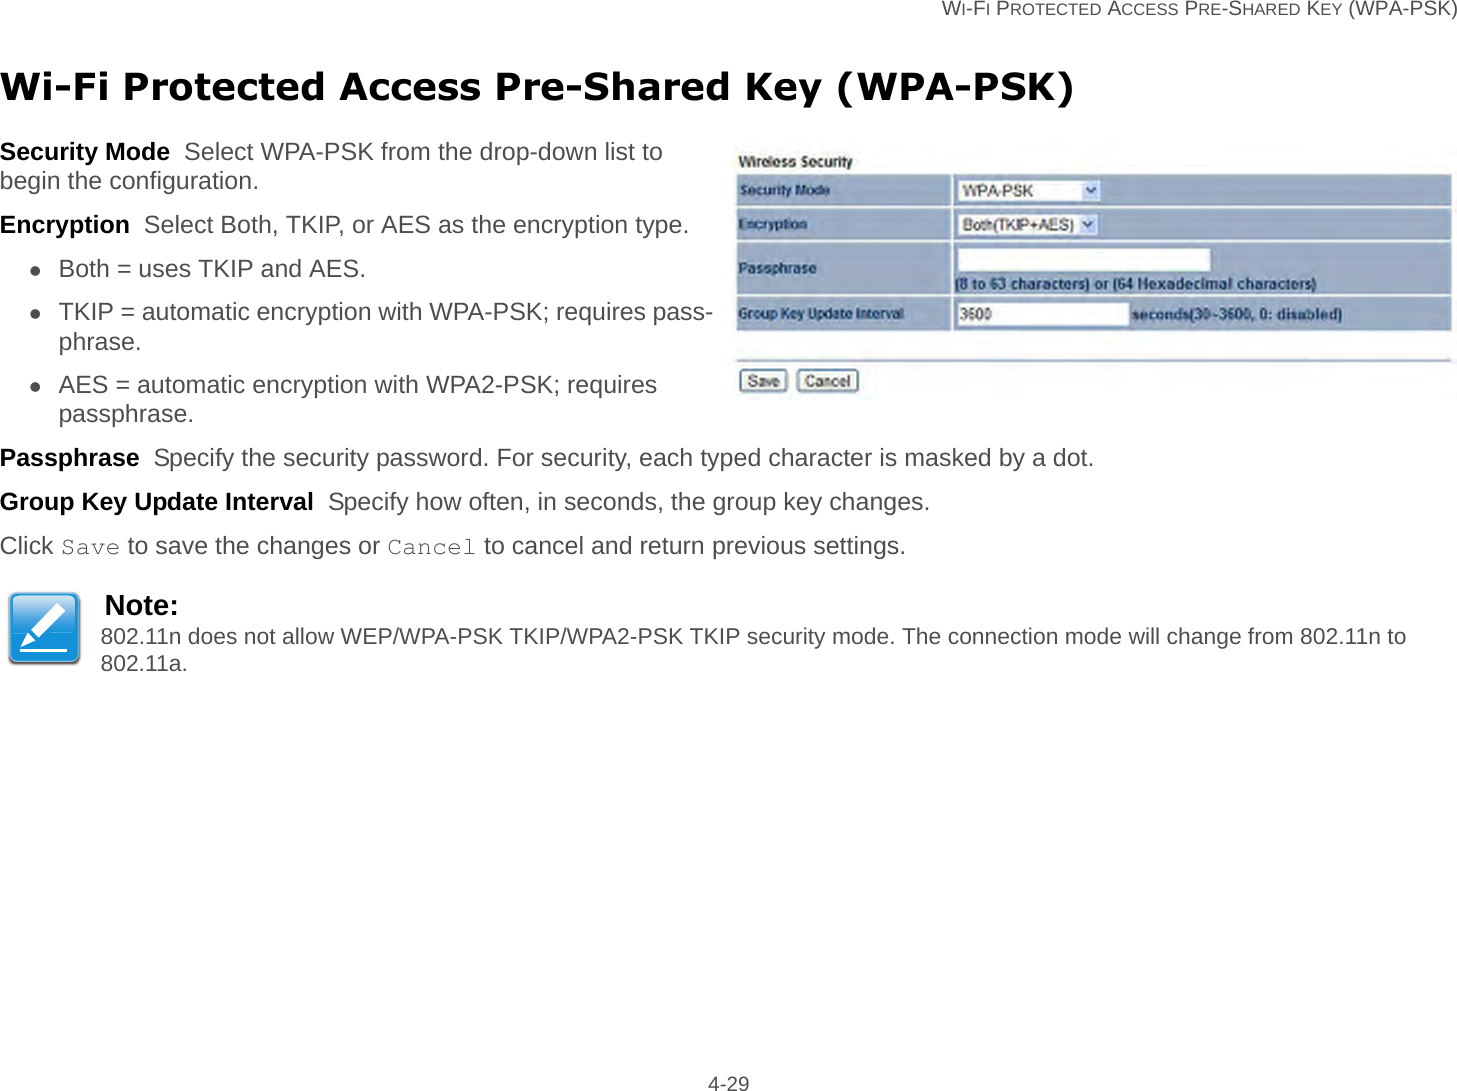   WI-FI PROTECTED ACCESS PRE-SHARED KEY (WPA-PSK) 4-29Wi-Fi Protected Access Pre-Shared Key (WPA-PSK)Security Mode  Select WPA-PSK from the drop-down list to begin the configuration.Encryption  Select Both, TKIP, or AES as the encryption type.Both = uses TKIP and AES.TKIP = automatic encryption with WPA-PSK; requires pass-phrase.AES = automatic encryption with WPA2-PSK; requires passphrase.Passphrase  Specify the security password. For security, each typed character is masked by a dot.Group Key Update Interval  Specify how often, in seconds, the group key changes.Click Save to save the changes or Cancel to cancel and return previous settings.Note:802.11n does not allow WEP/WPA-PSK TKIP/WPA2-PSK TKIP security mode. The connection mode will change from 802.11n to 802.11a.